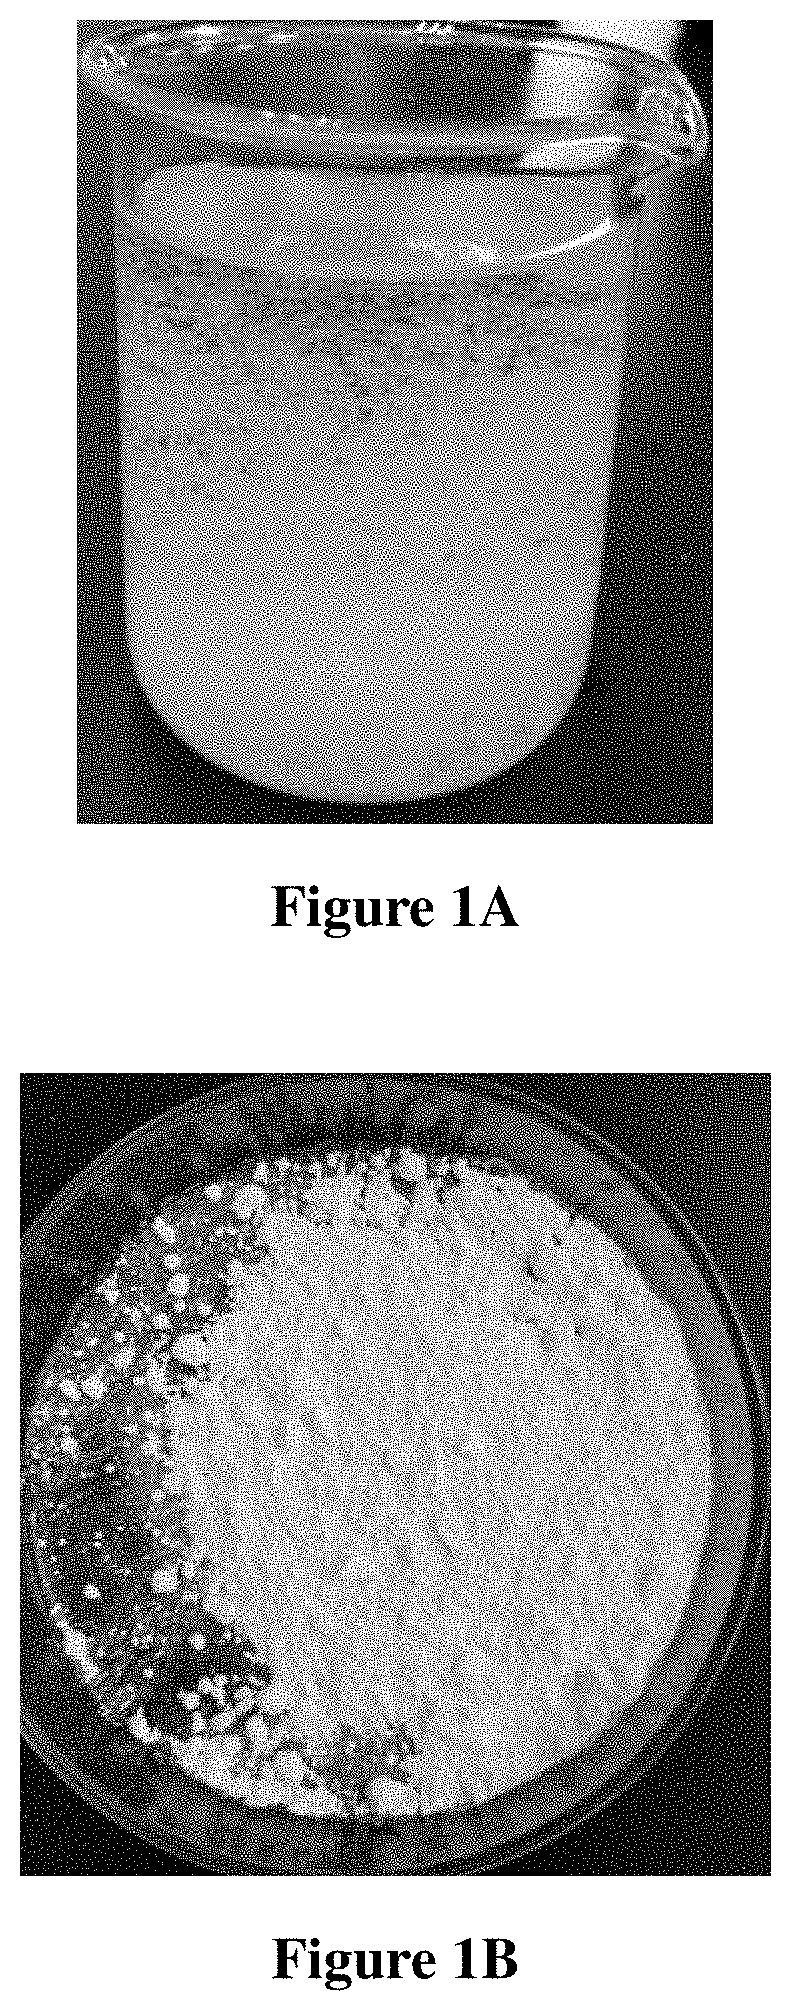 Crystal of polymyxin b1 sulfate, polymyxin b2 sulfate or their mixture and preparation method thereof